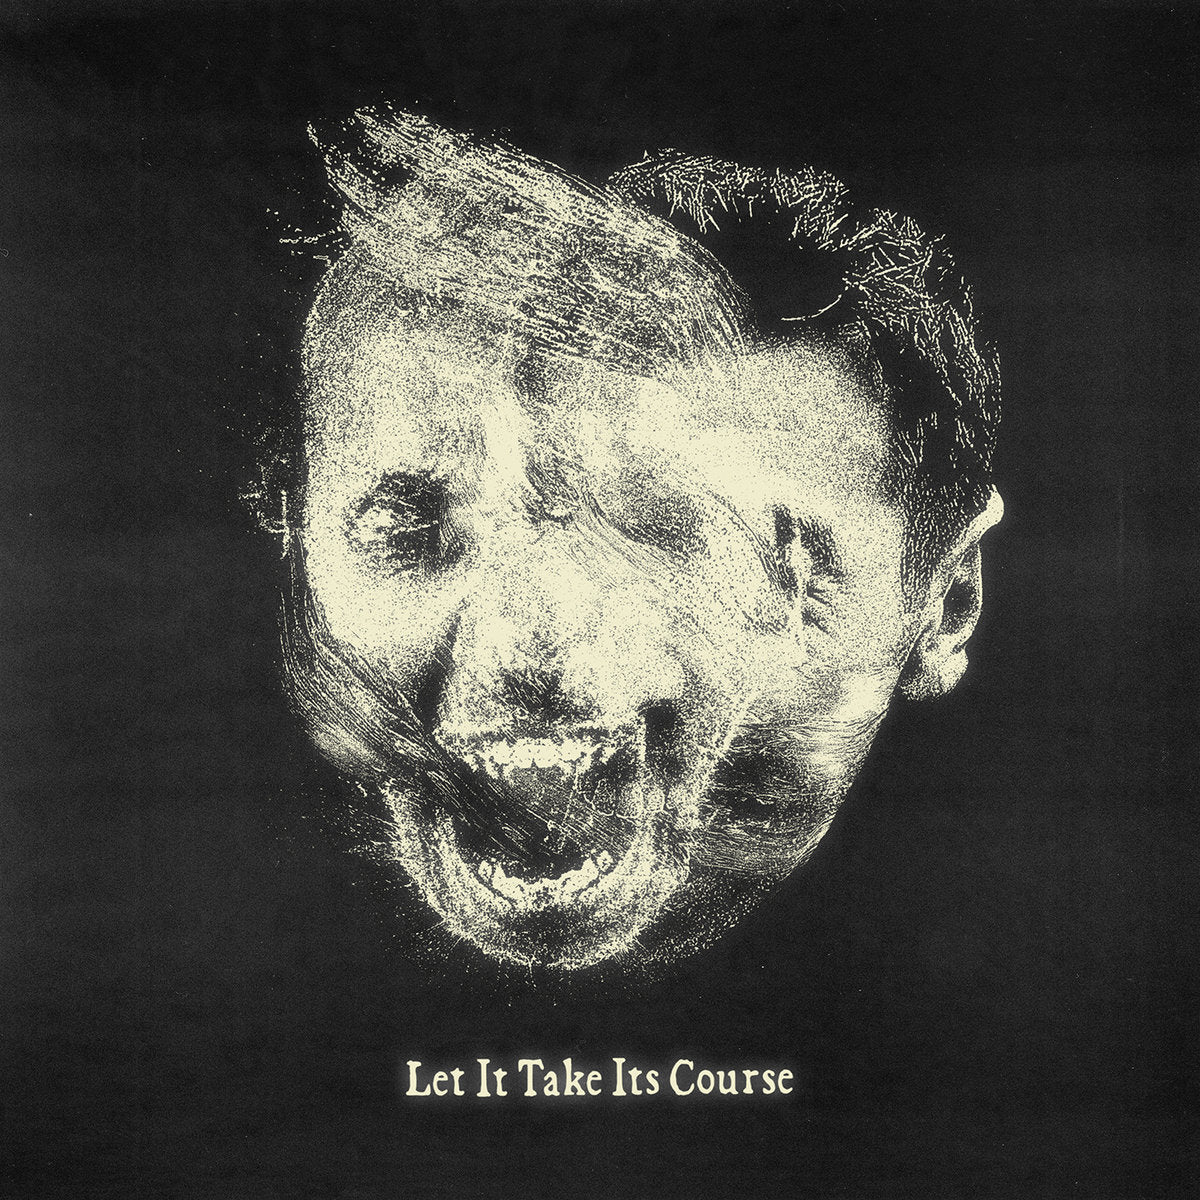 Orthodox "Let It Take Its Course" 12" Vinyl